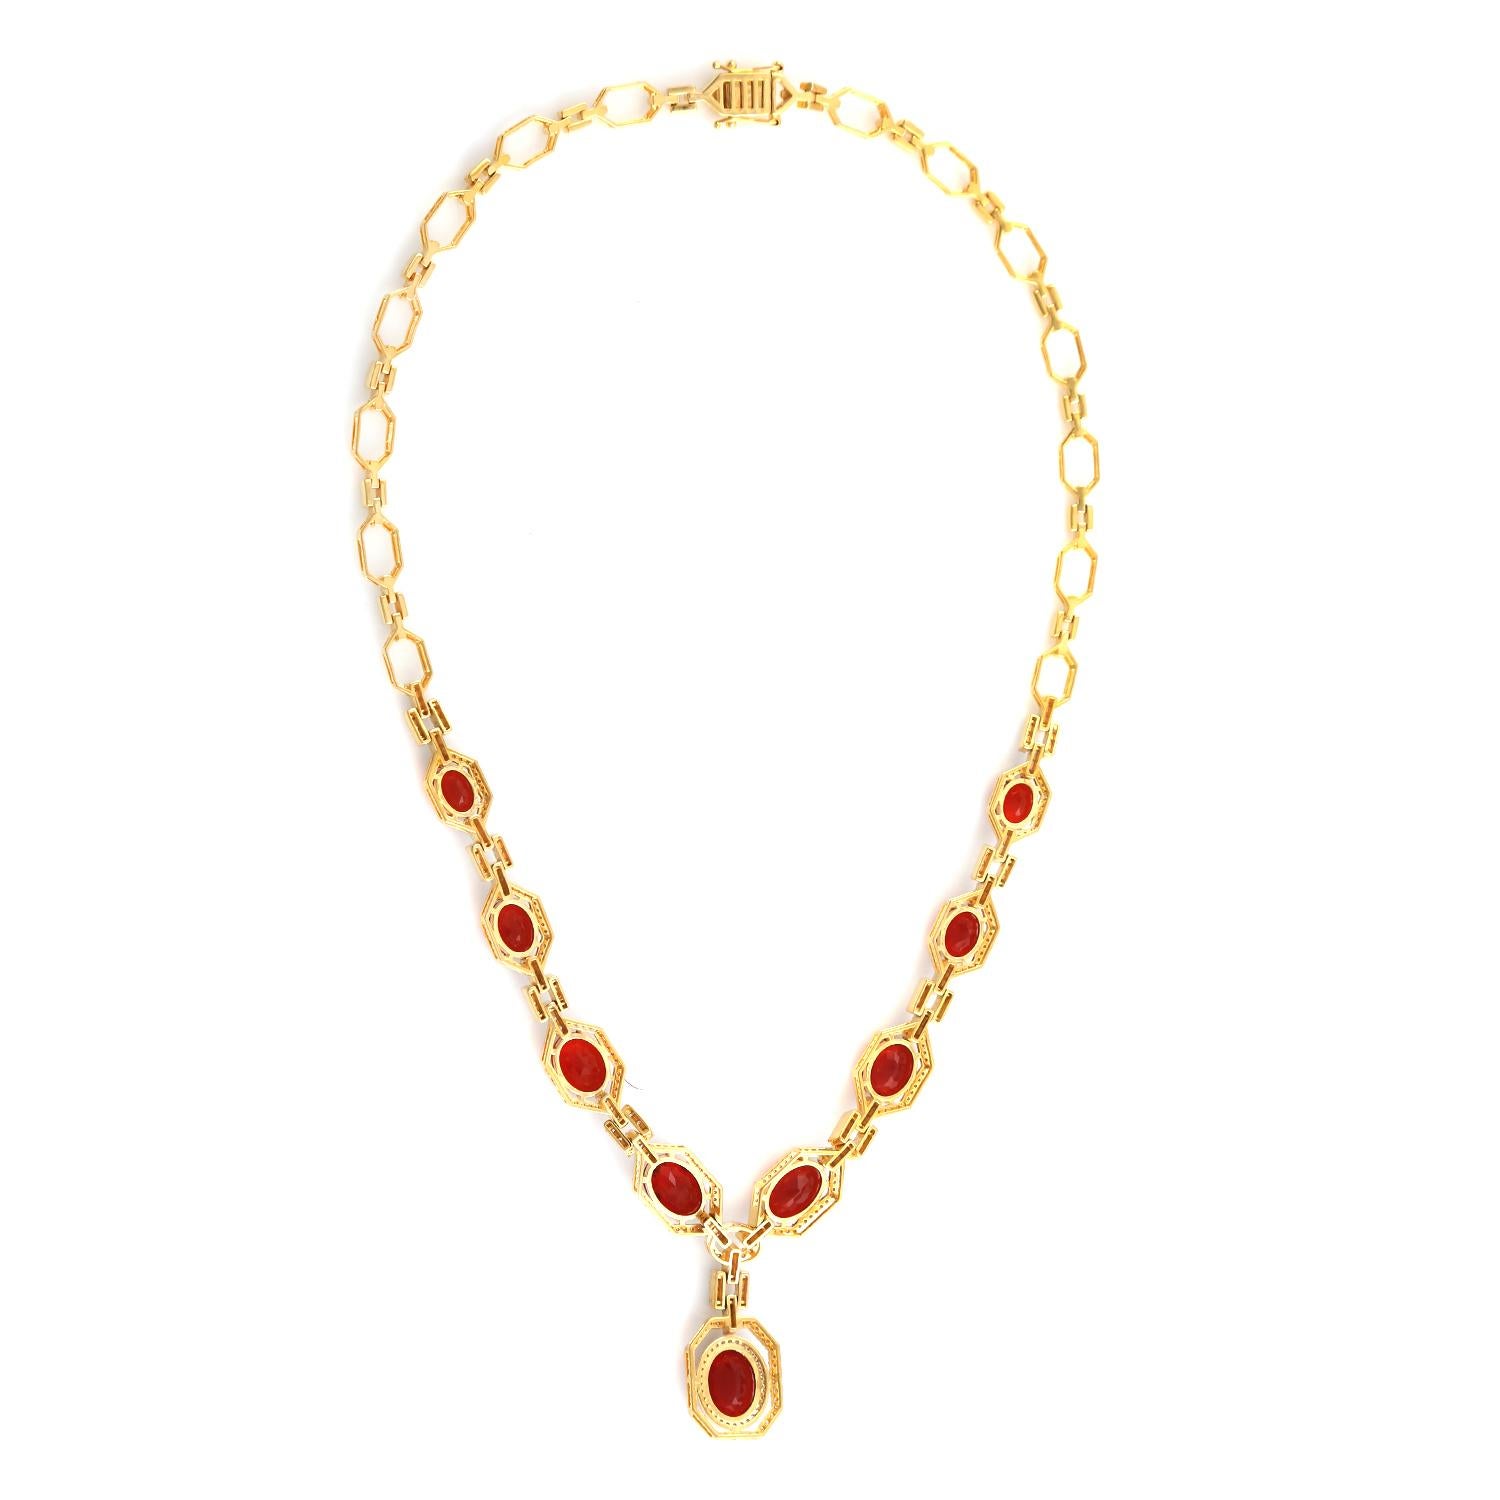 Women's Oval Shaped Fire Opal Chain Necklace With Pave Diamonds In 18k Yellow Gold For Sale